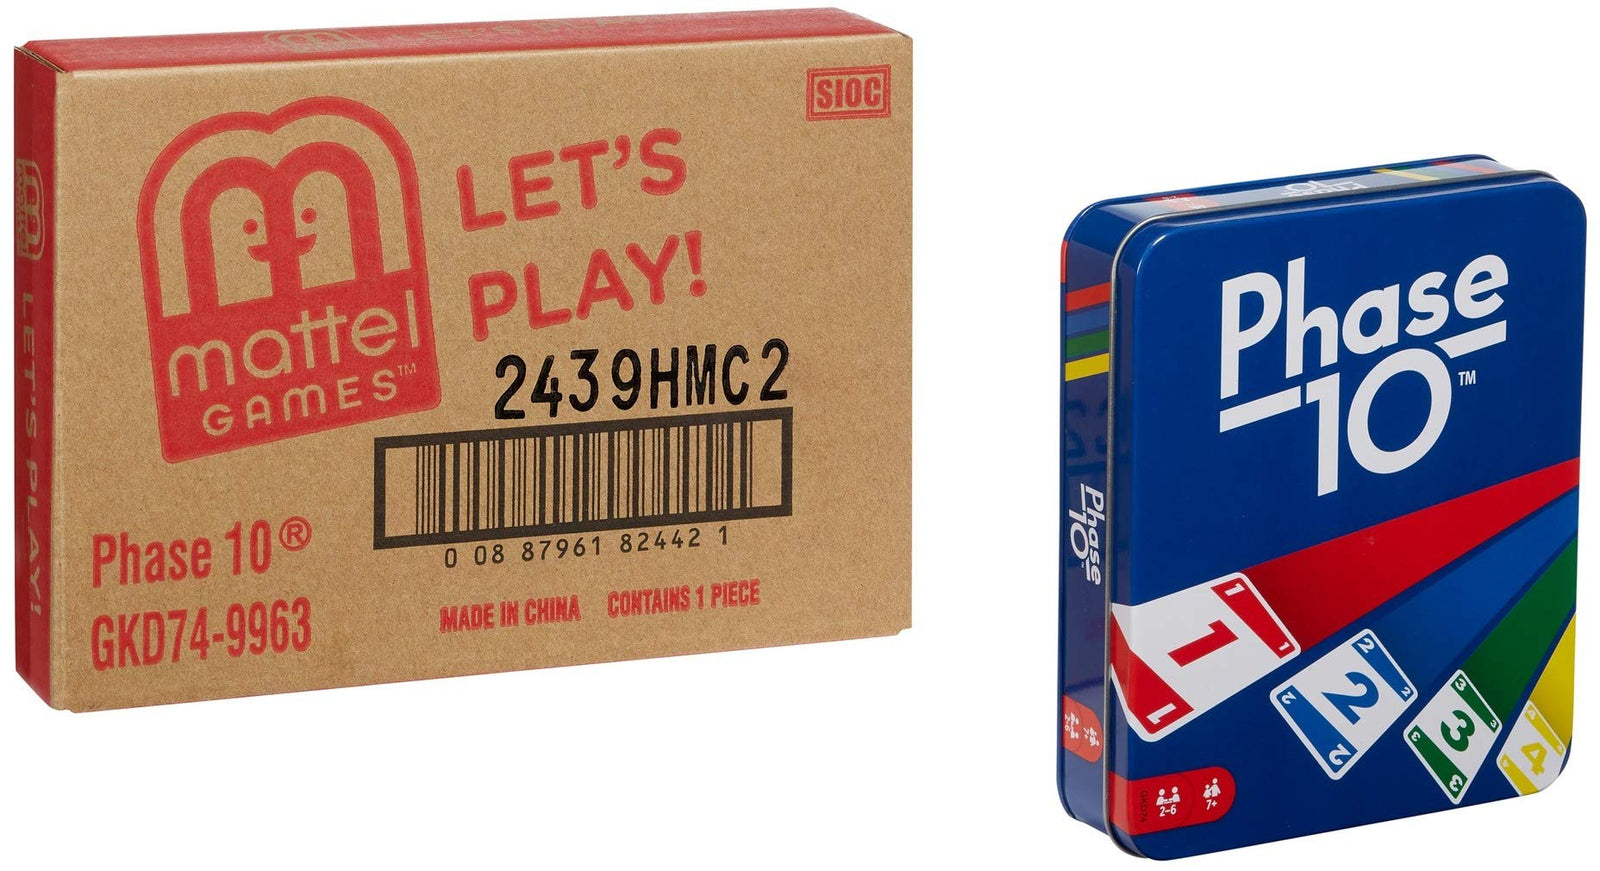 Phase 10 Card Game with 108 Cards, Makes a Great Gift for Kids, Family or Adult Game Night, Ages 7 Years and Older [Amazon Exclusive]